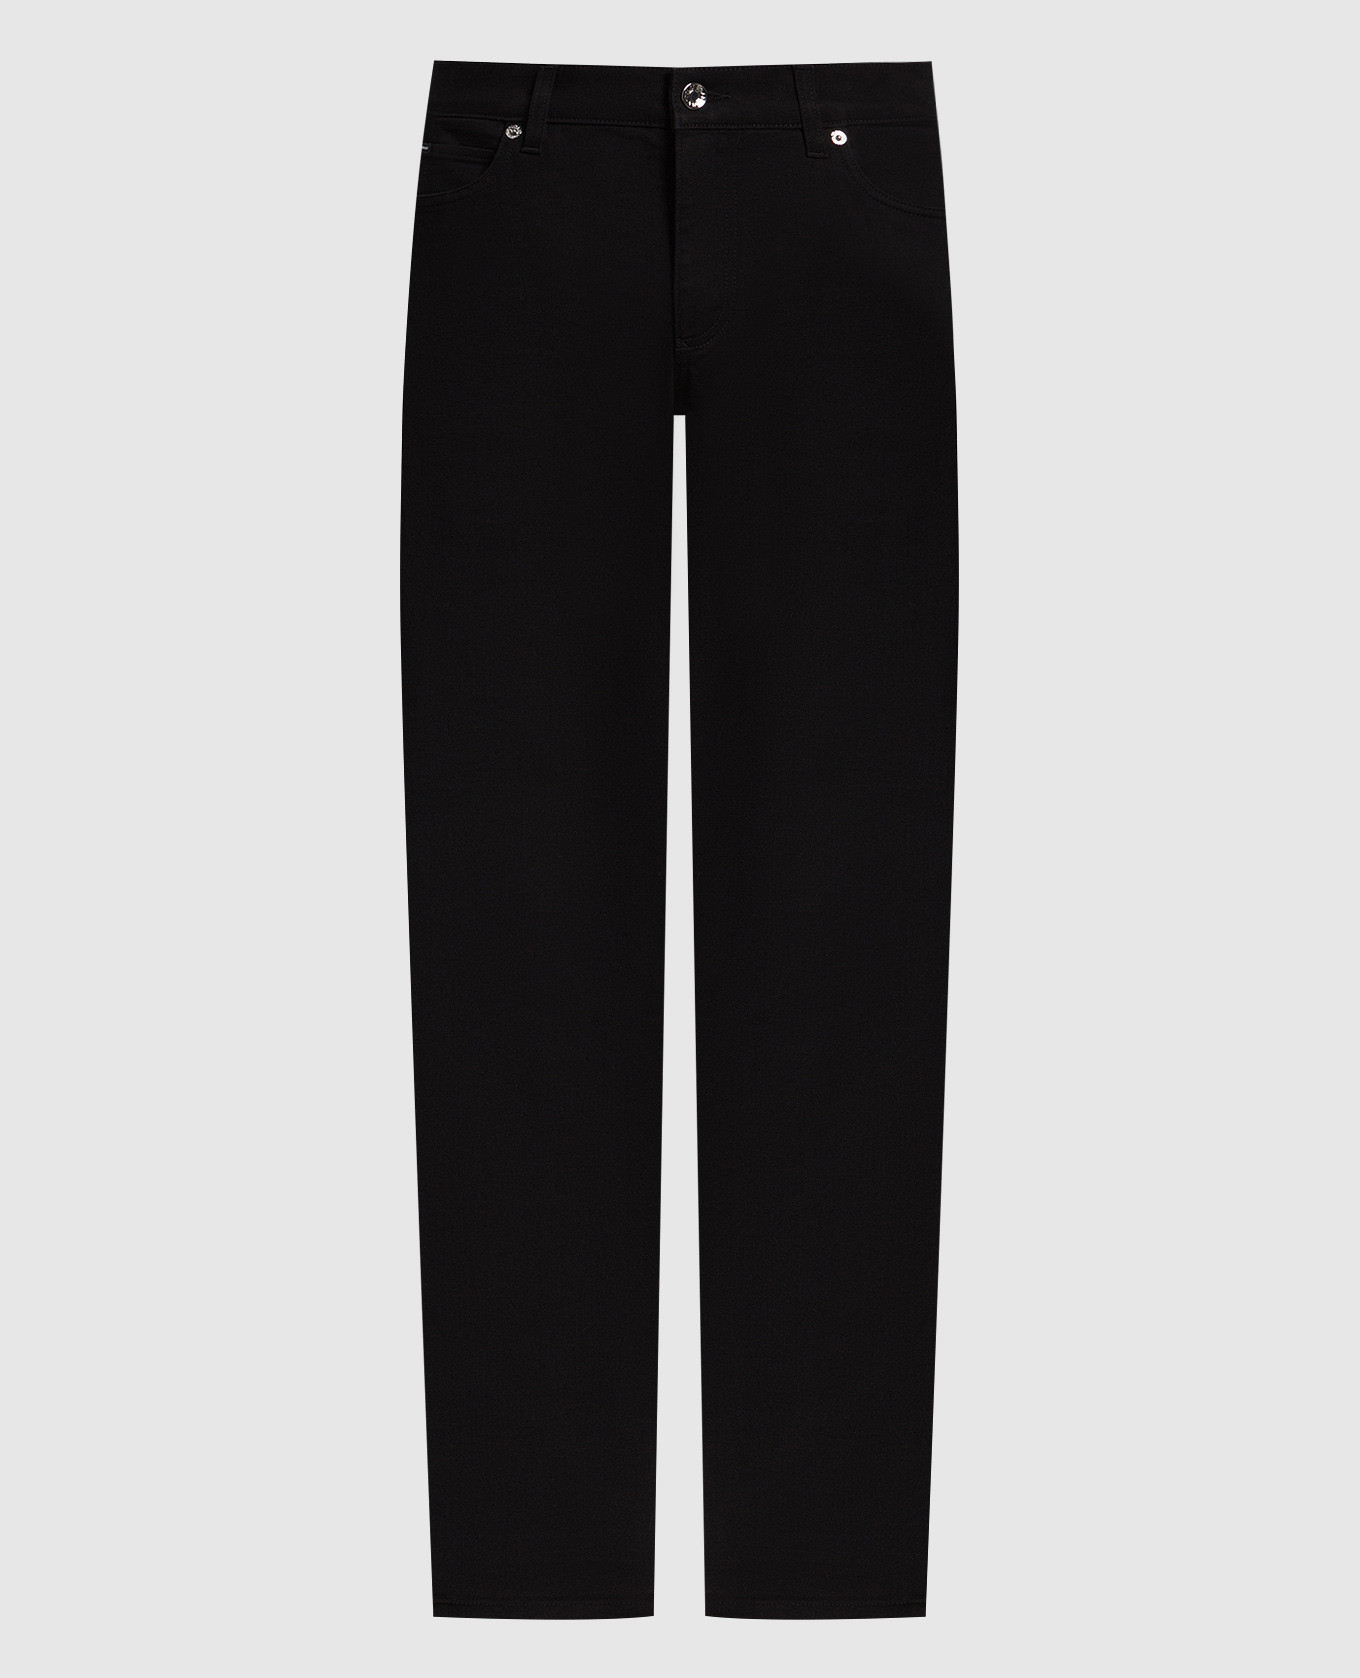 Black jeans with logo